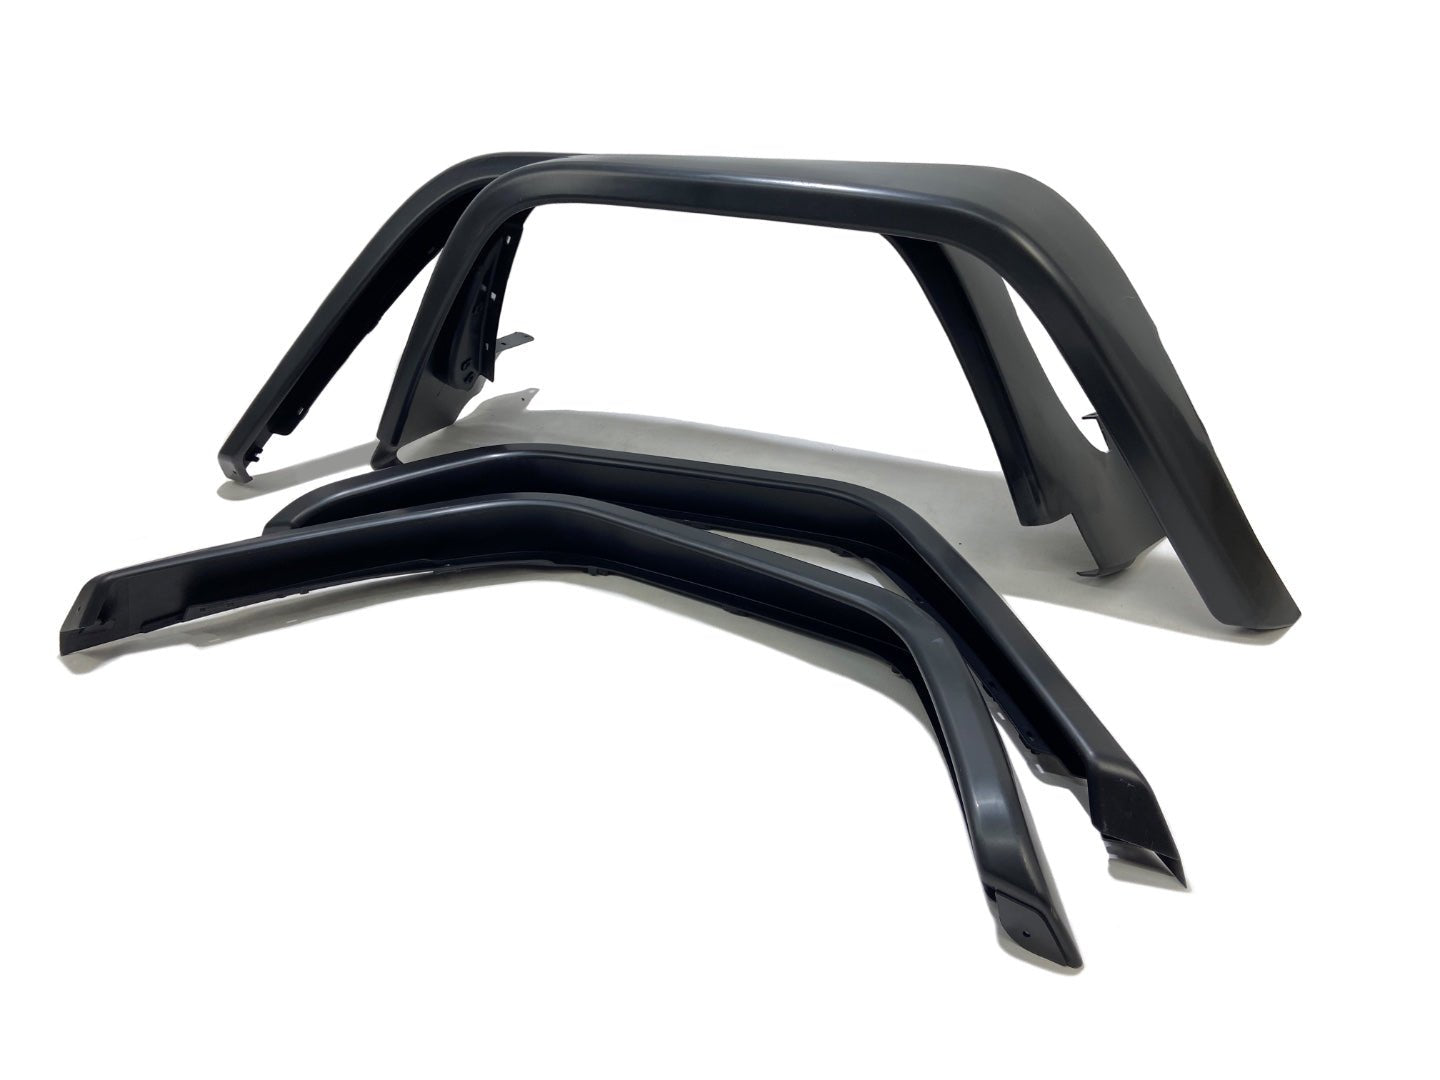 AMG fender flares 12cm for Mercedes-Benz W463 G-Wagon ABS plastic